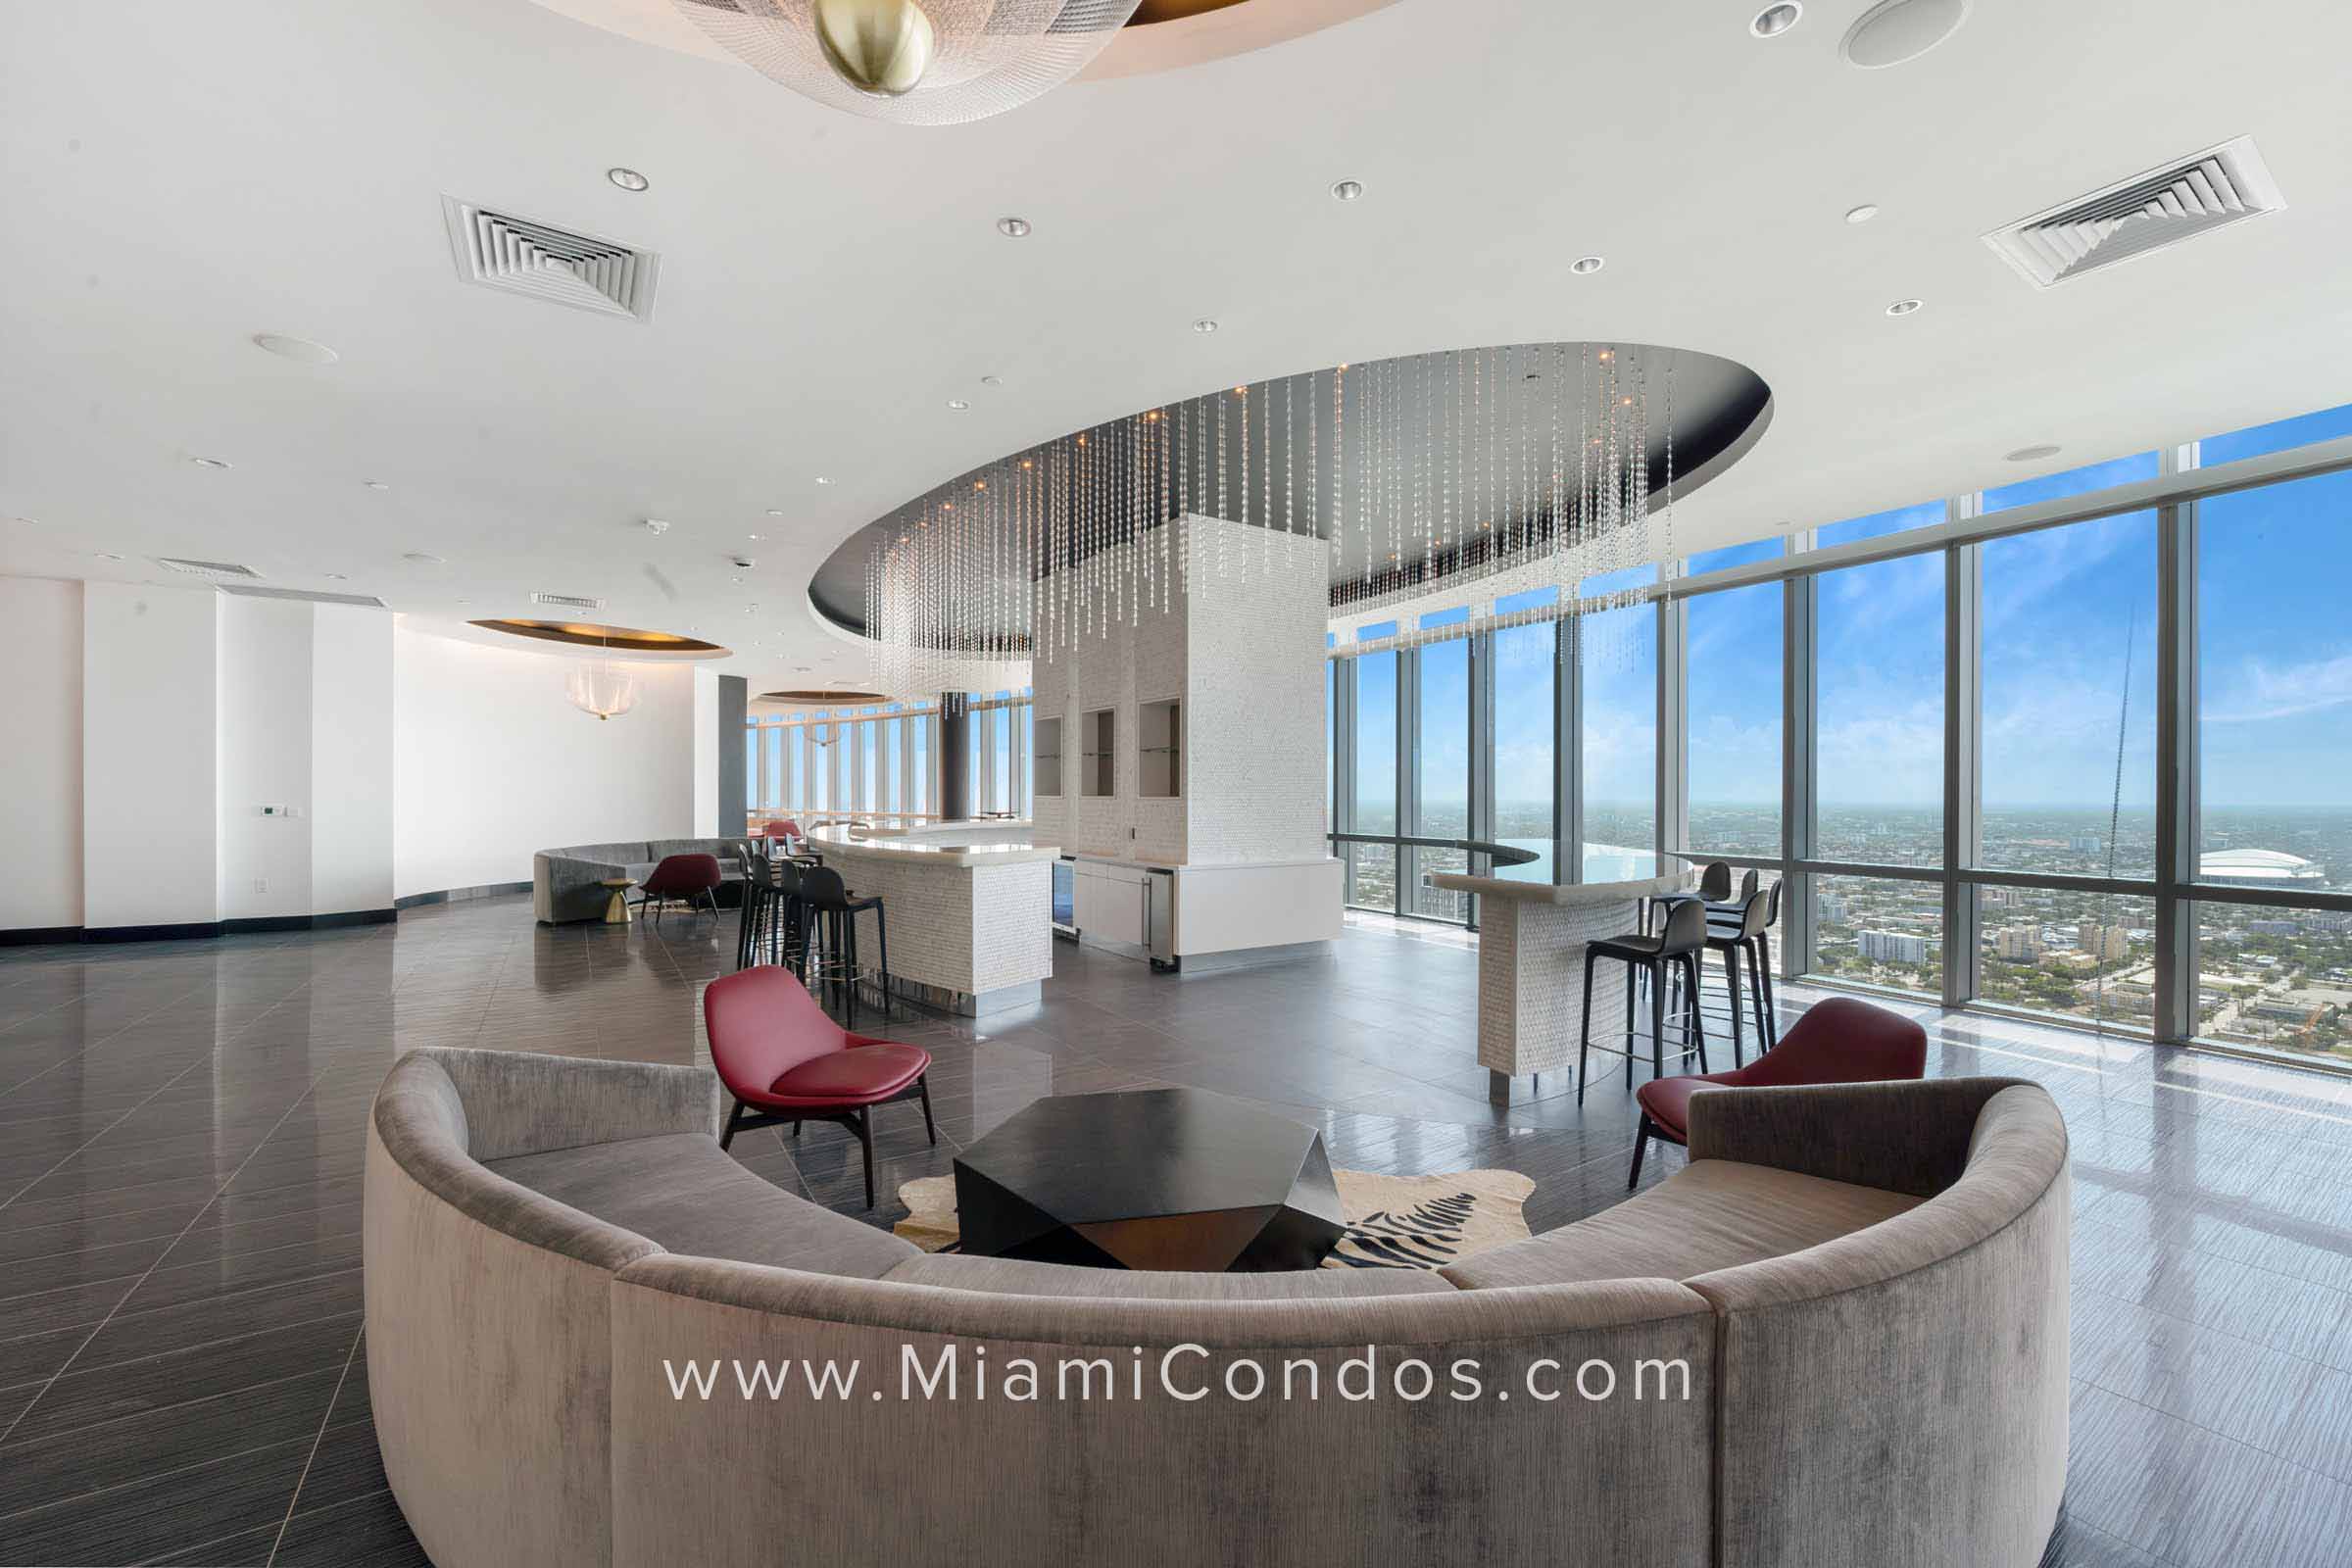 Paramount Miami Worldcenter Rooftop Lounge Area